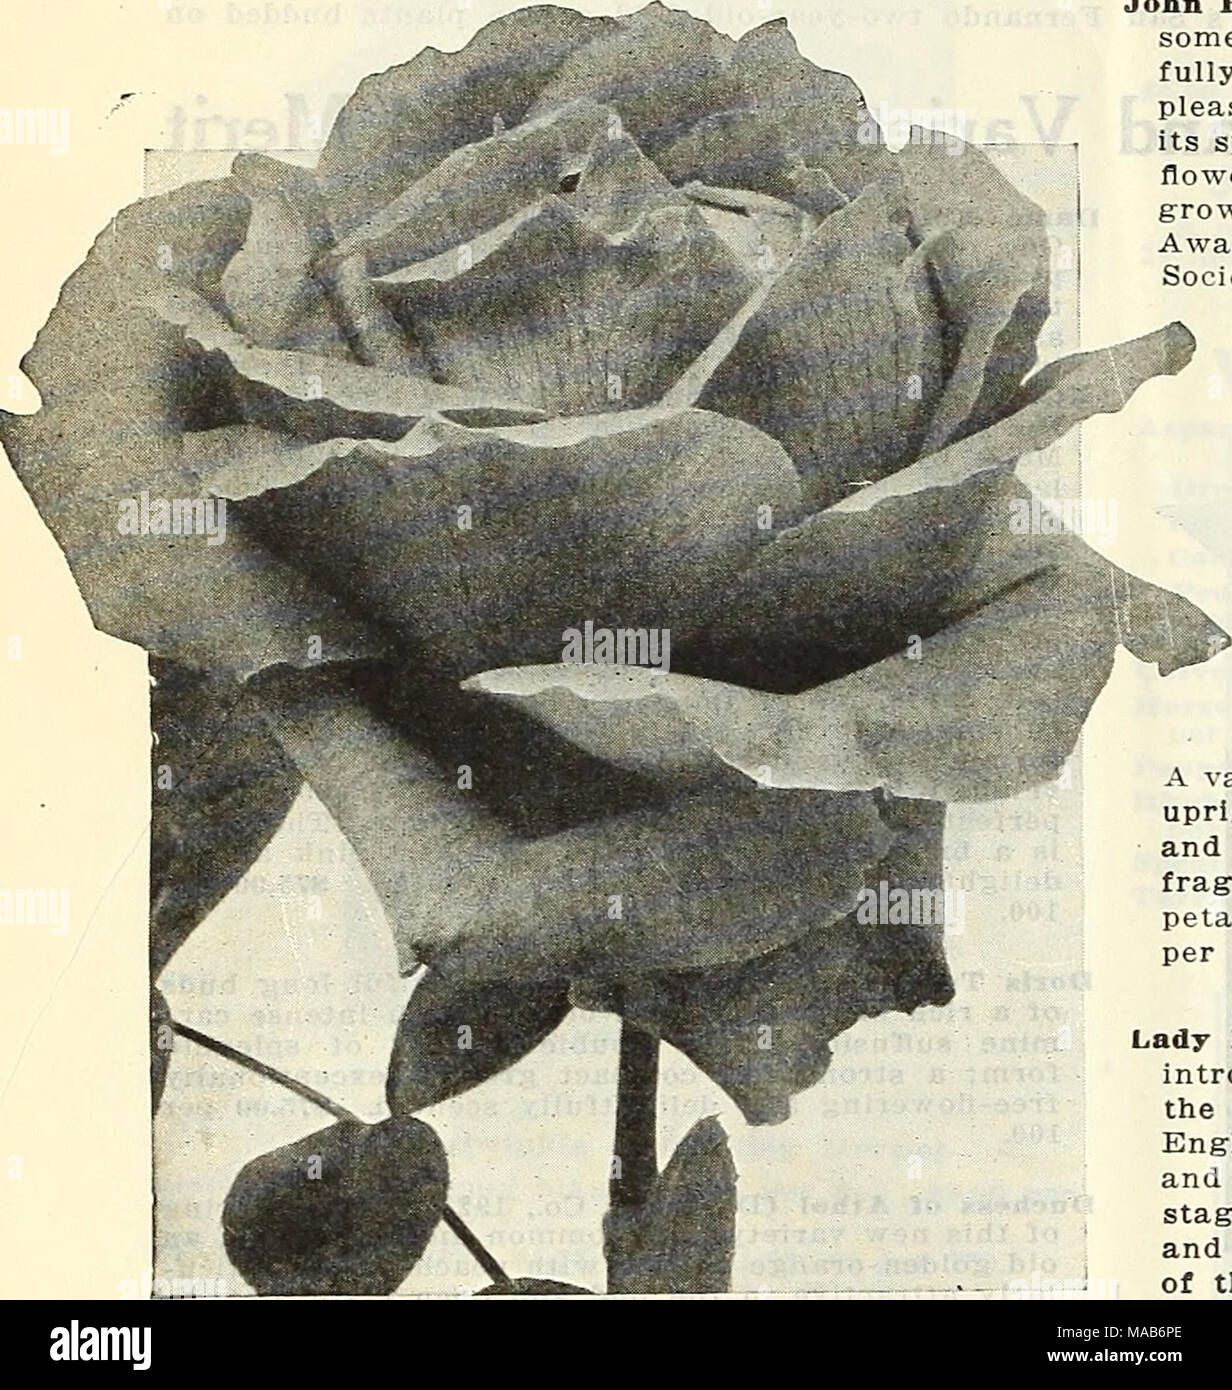 . Dreer's wholesale price list : bulbs for florists plants for florists flower seeds for florists . 'Sew Hybrid-Tea Rose, John Rnssell Irish Courage (McGredy, 1927). A splendid addition to the list of bi-colored Roses, the color being a soft shrimp-pink merging to salmon in the fully ex- panded petals, the whole overlaying a golden orange ground, this color being very pronounced at the centre of the flower. Growth and fragrance mod- erate, with attractive dark glossy-green foliage. $75.00 per 100. Irish Hope (McGredy, 1927). A splendid and distinct red with well-formed buds composed of heavy,  Stock Photo